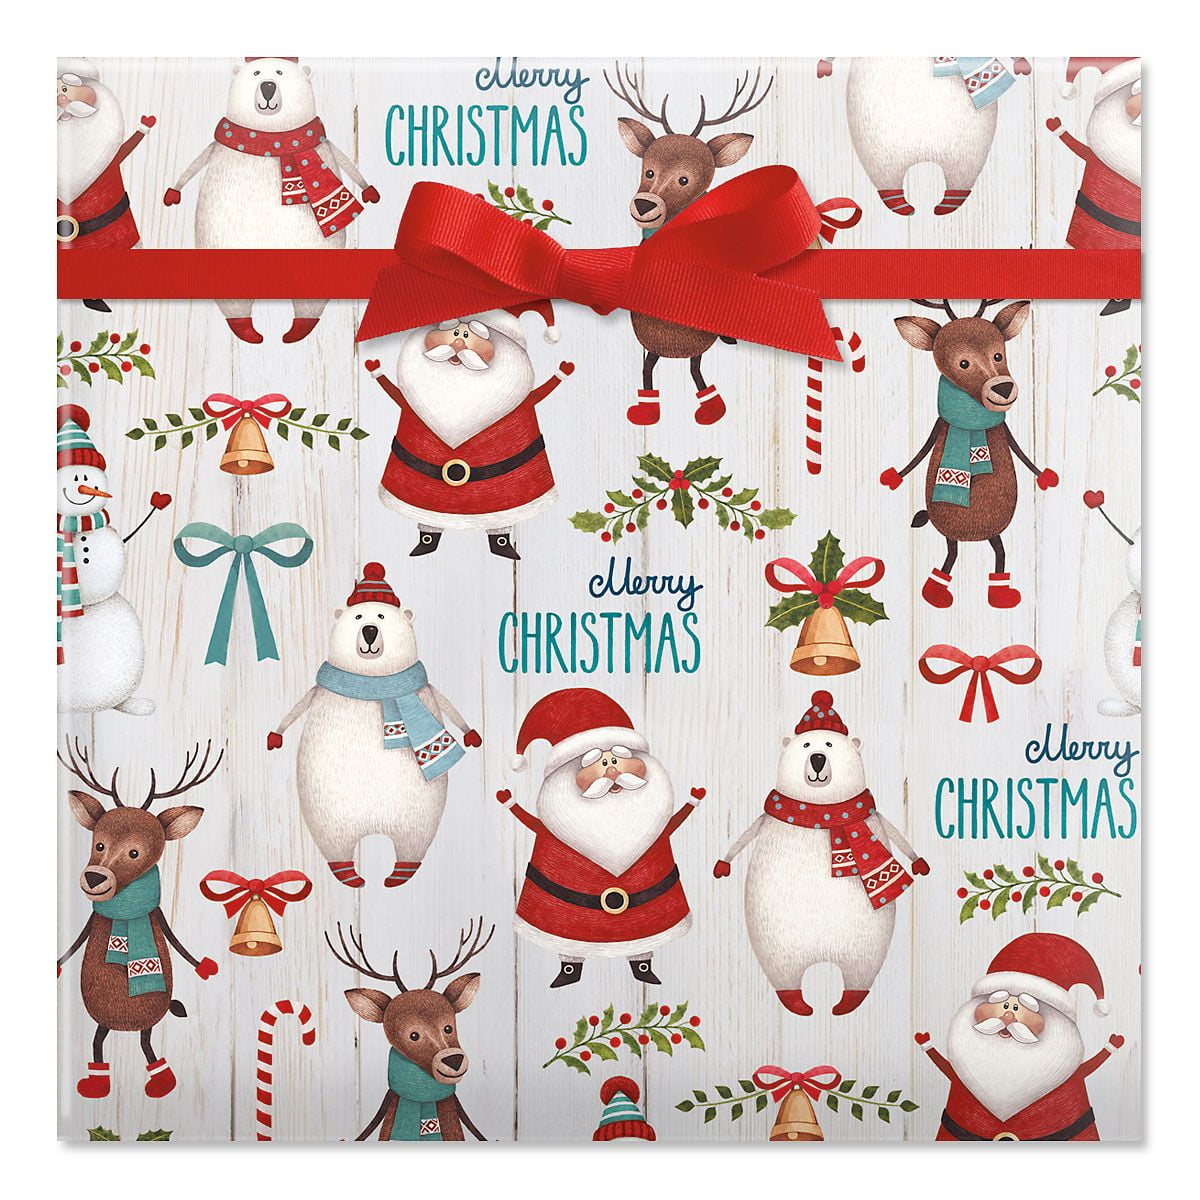 Details about   Modern Penguins Christmas Wrapping Paper Red Foil Santa Hat 1 Roll 40 Sq Ft 